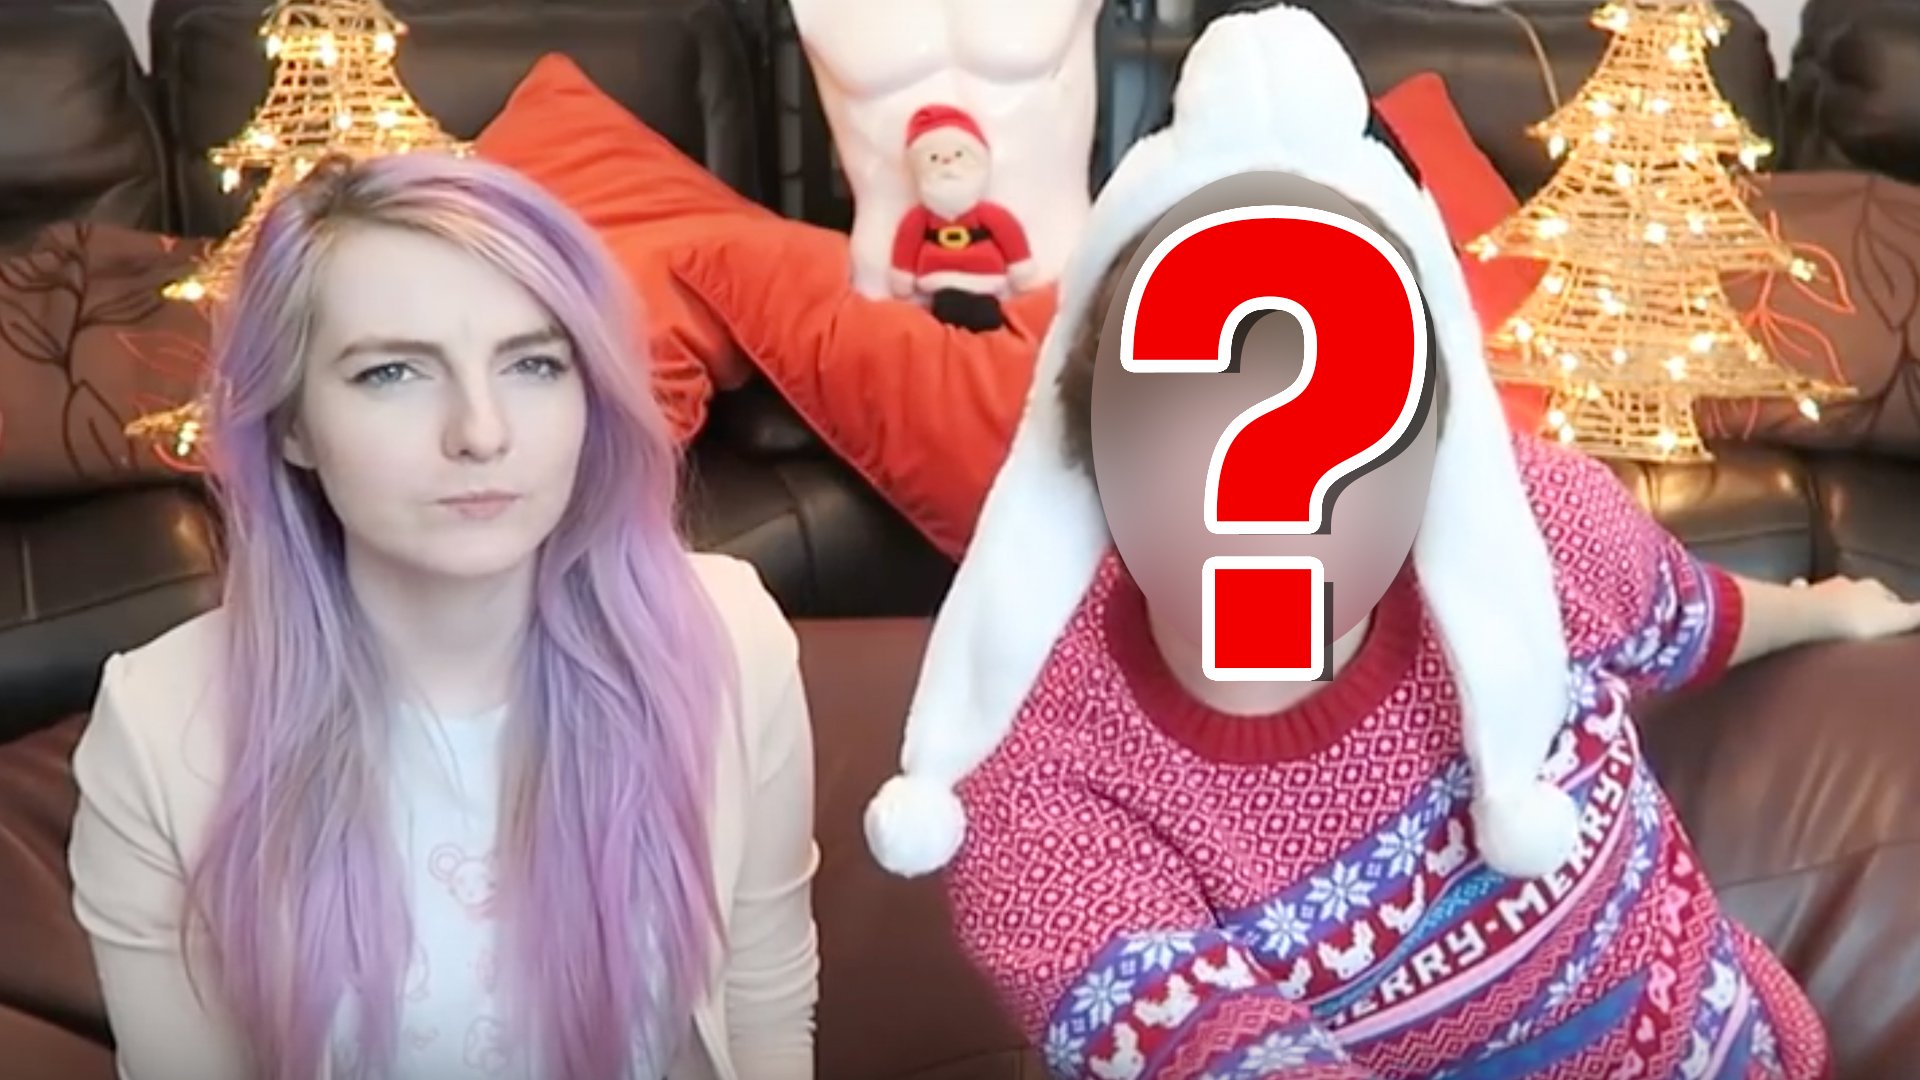 LDShadowLady and a mystery guest